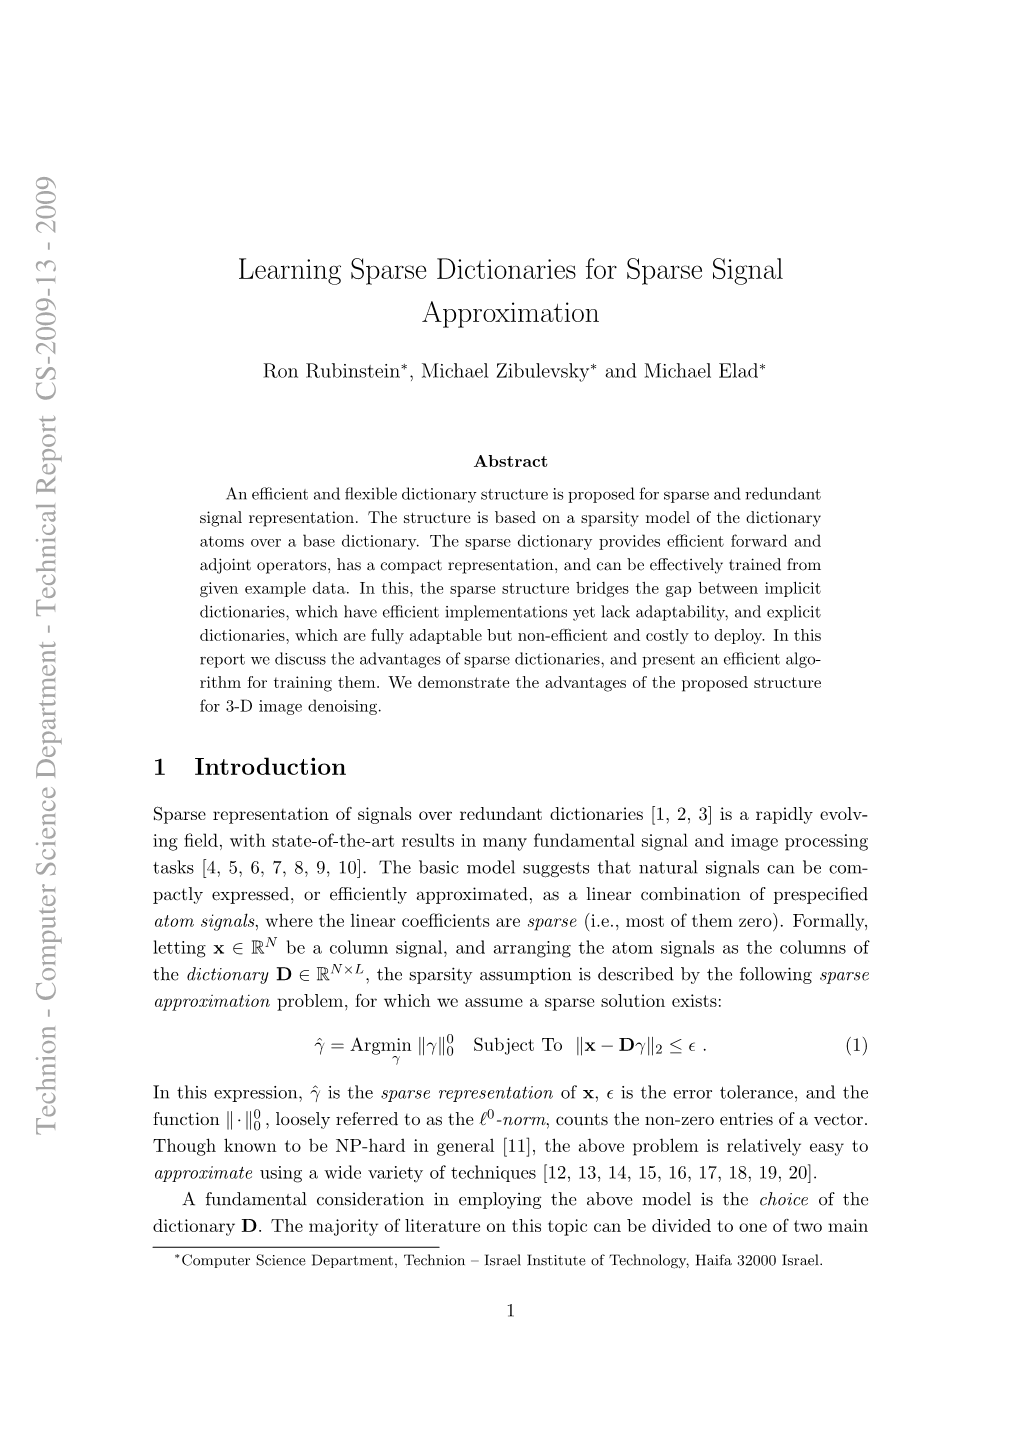 Learning Sparse Dictionaries for Sparse Signal Approximation